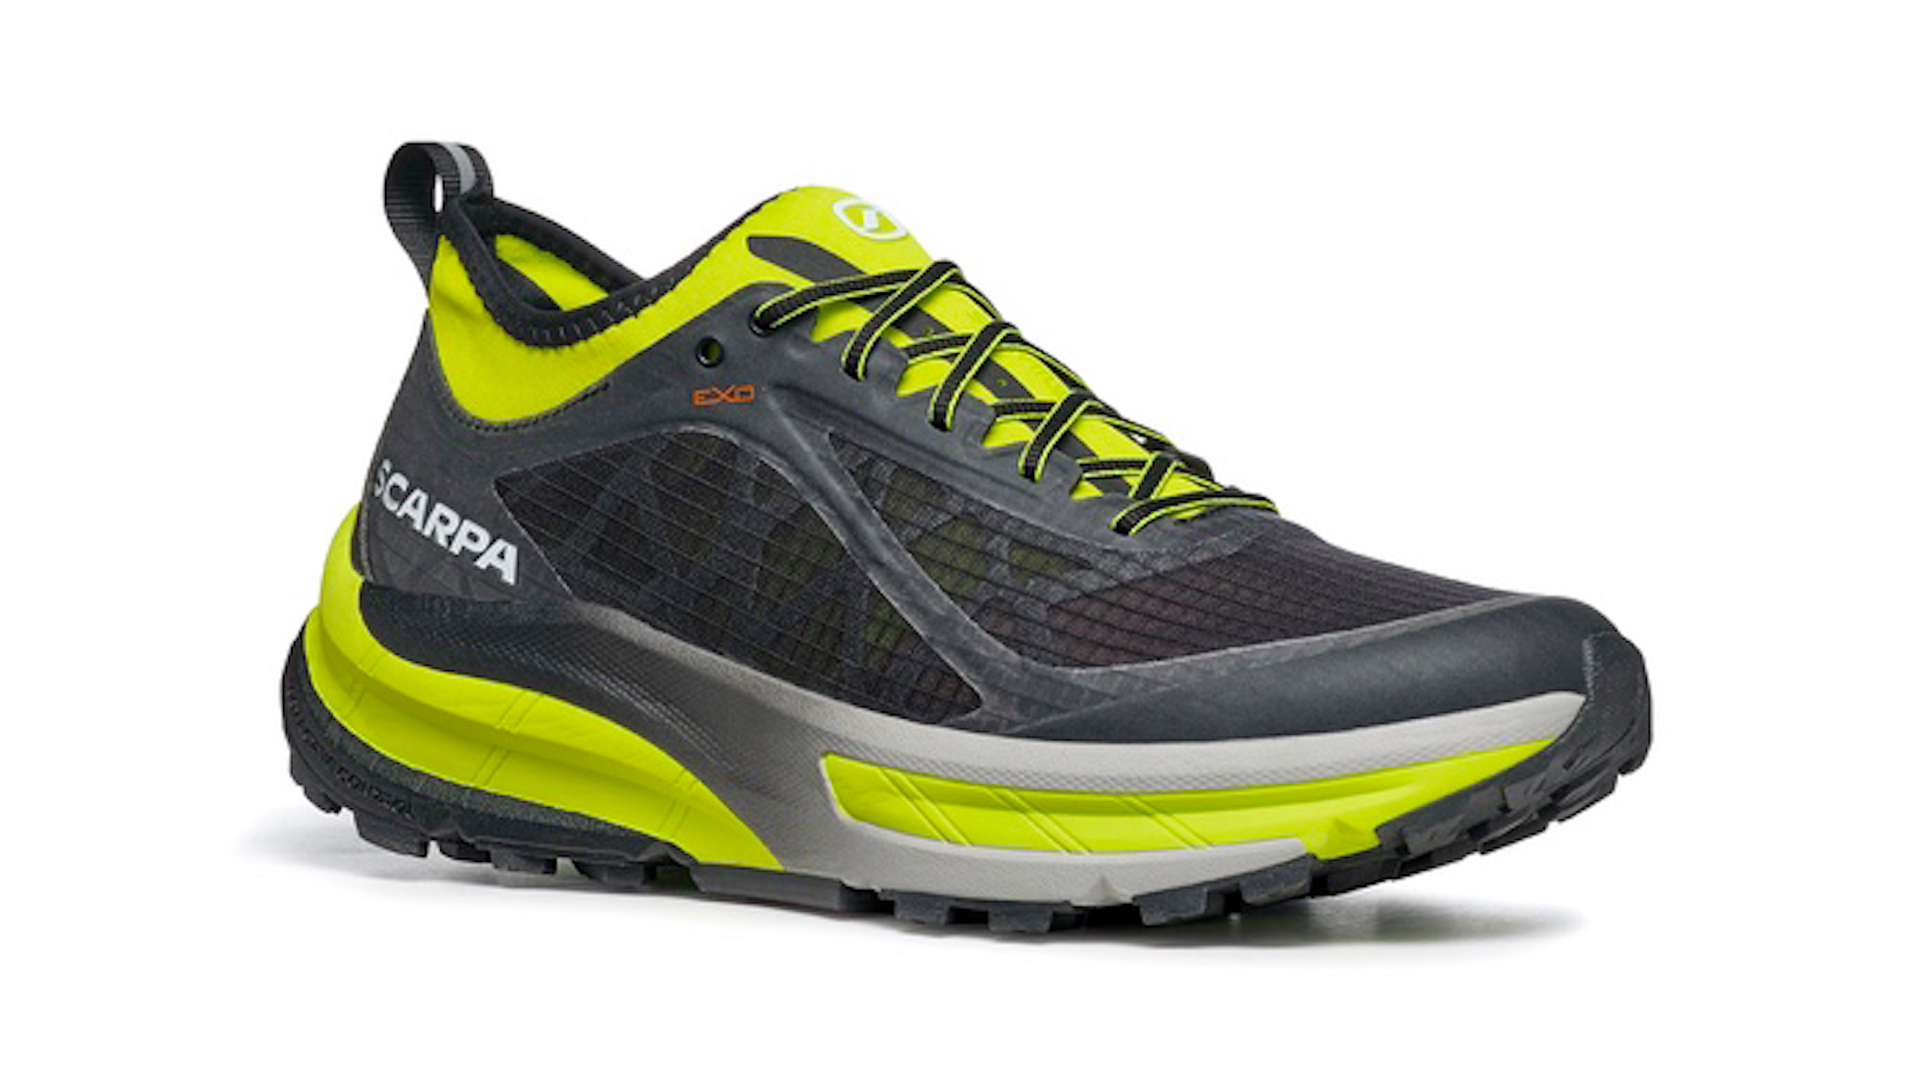 Scarpa Golden Gate ATR road to trail running shoes review | Advnture